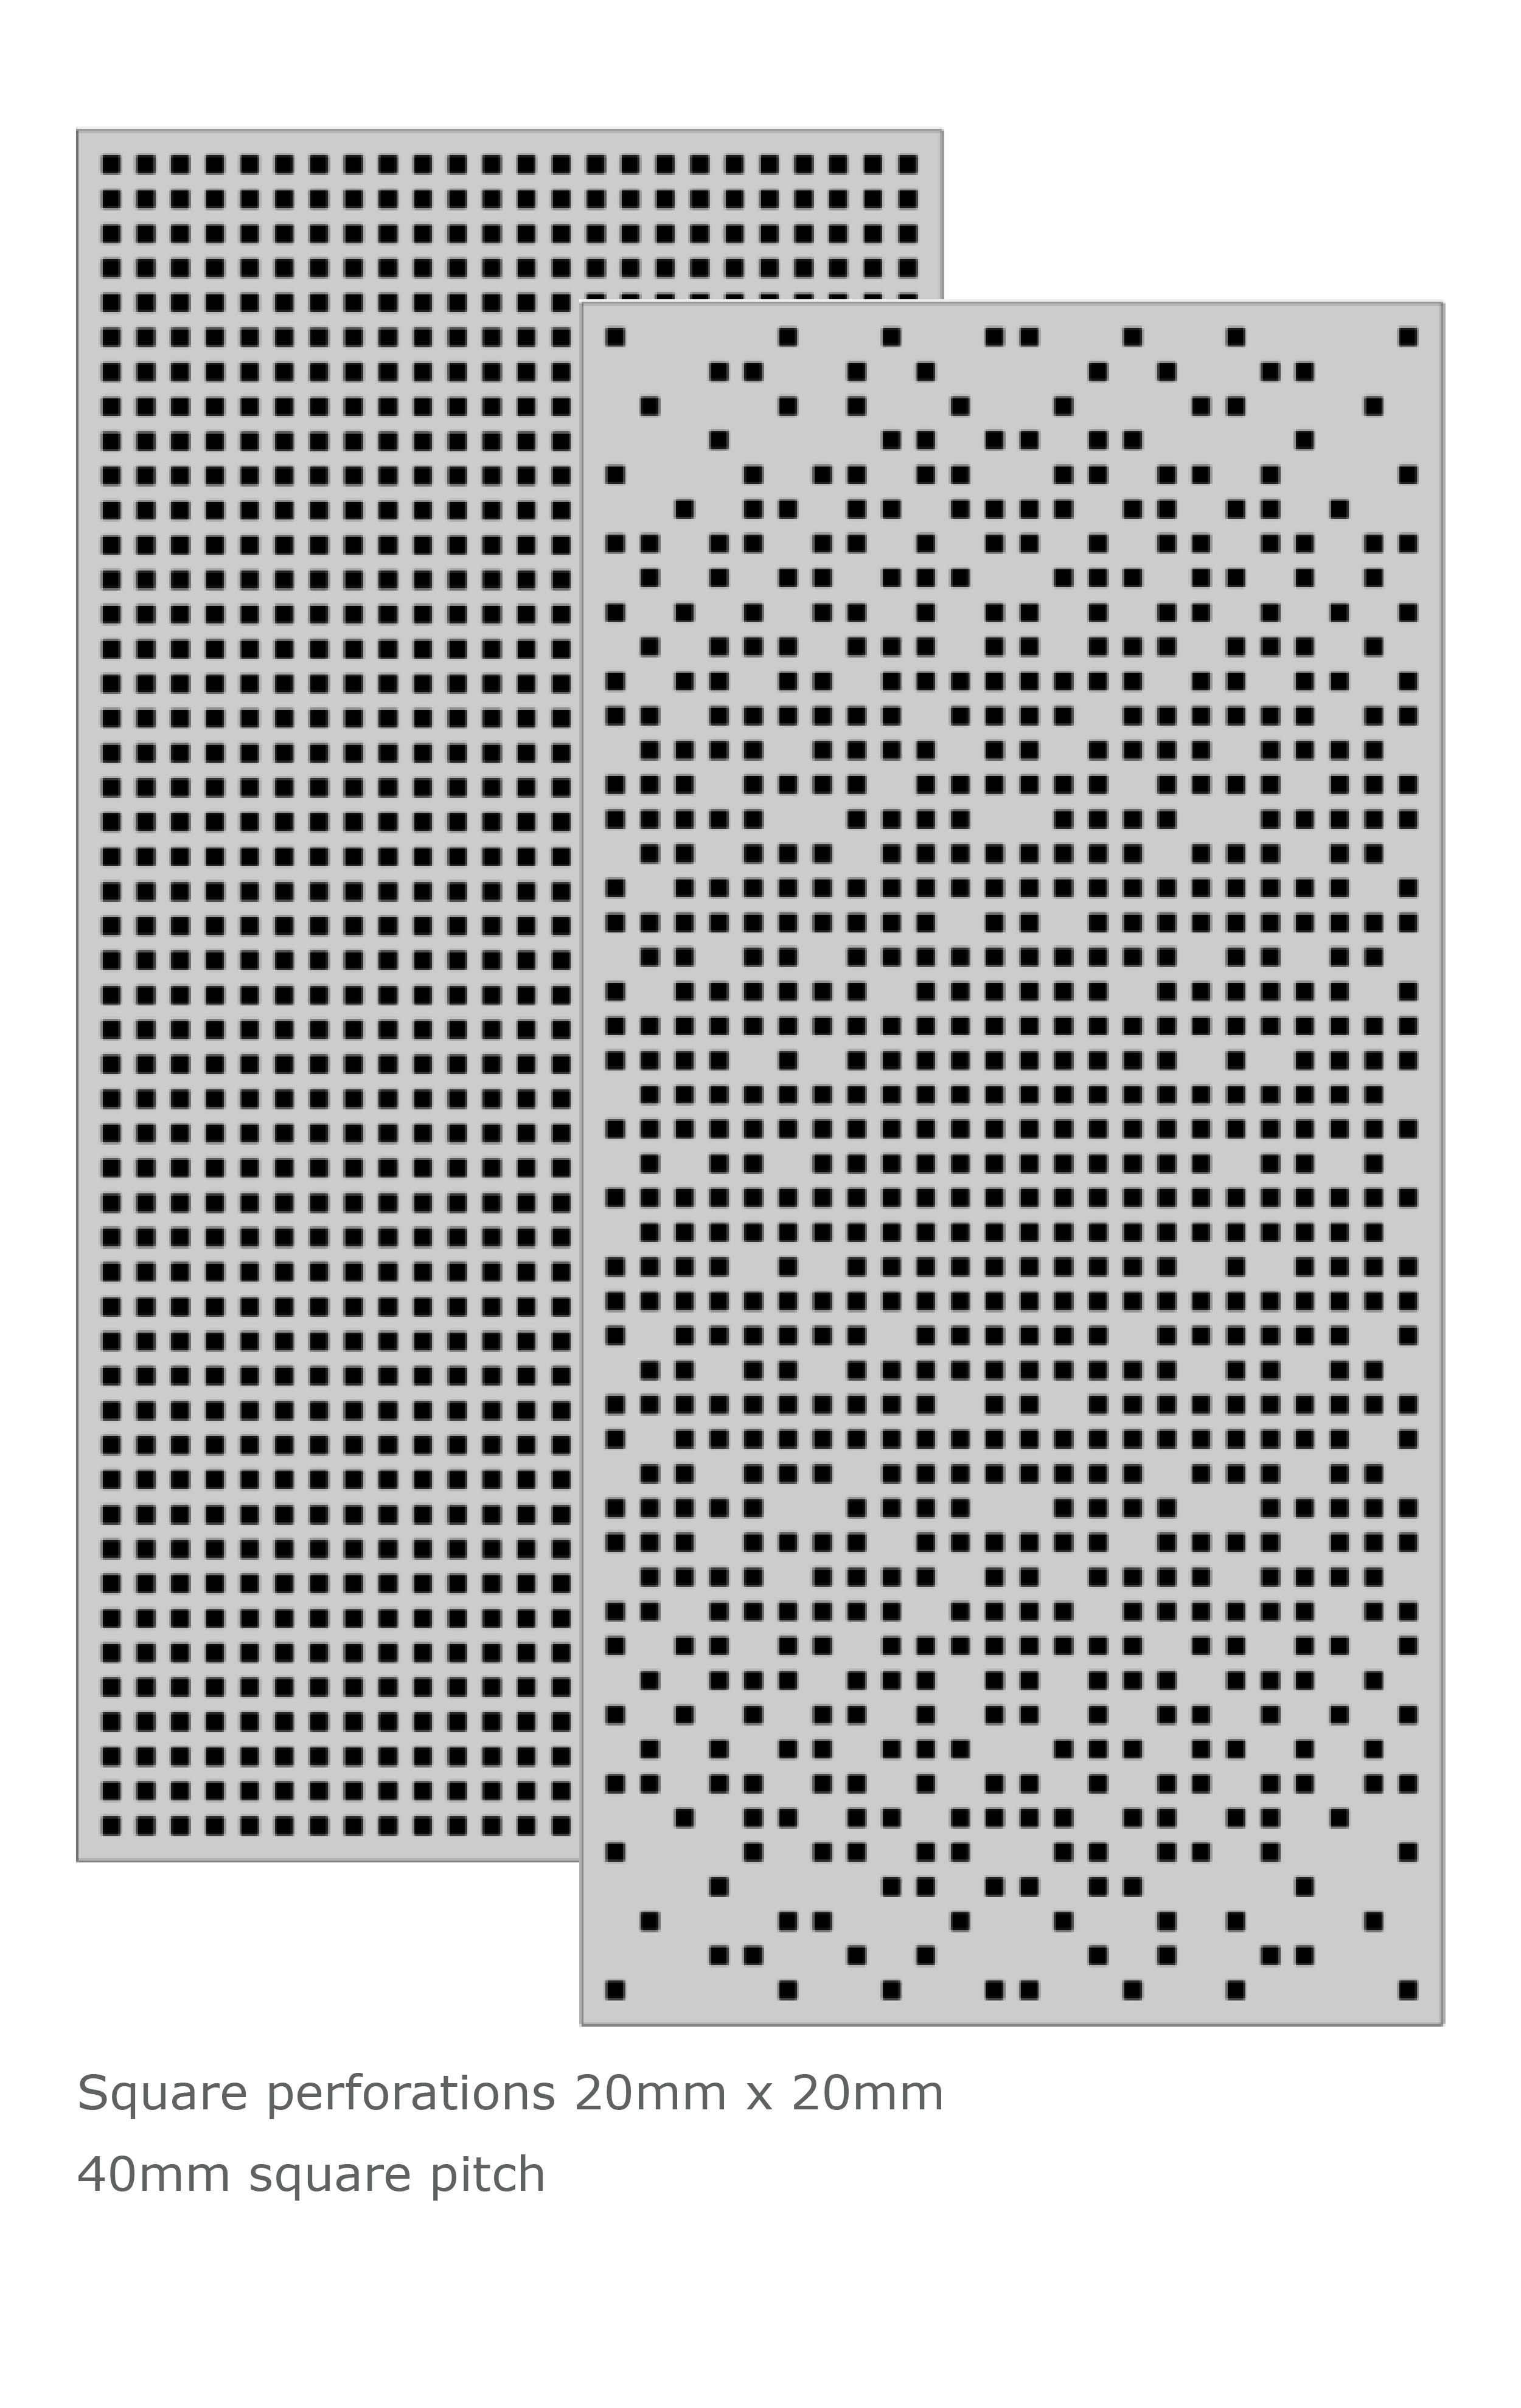 Bespoke Perforated Sheets - Squares